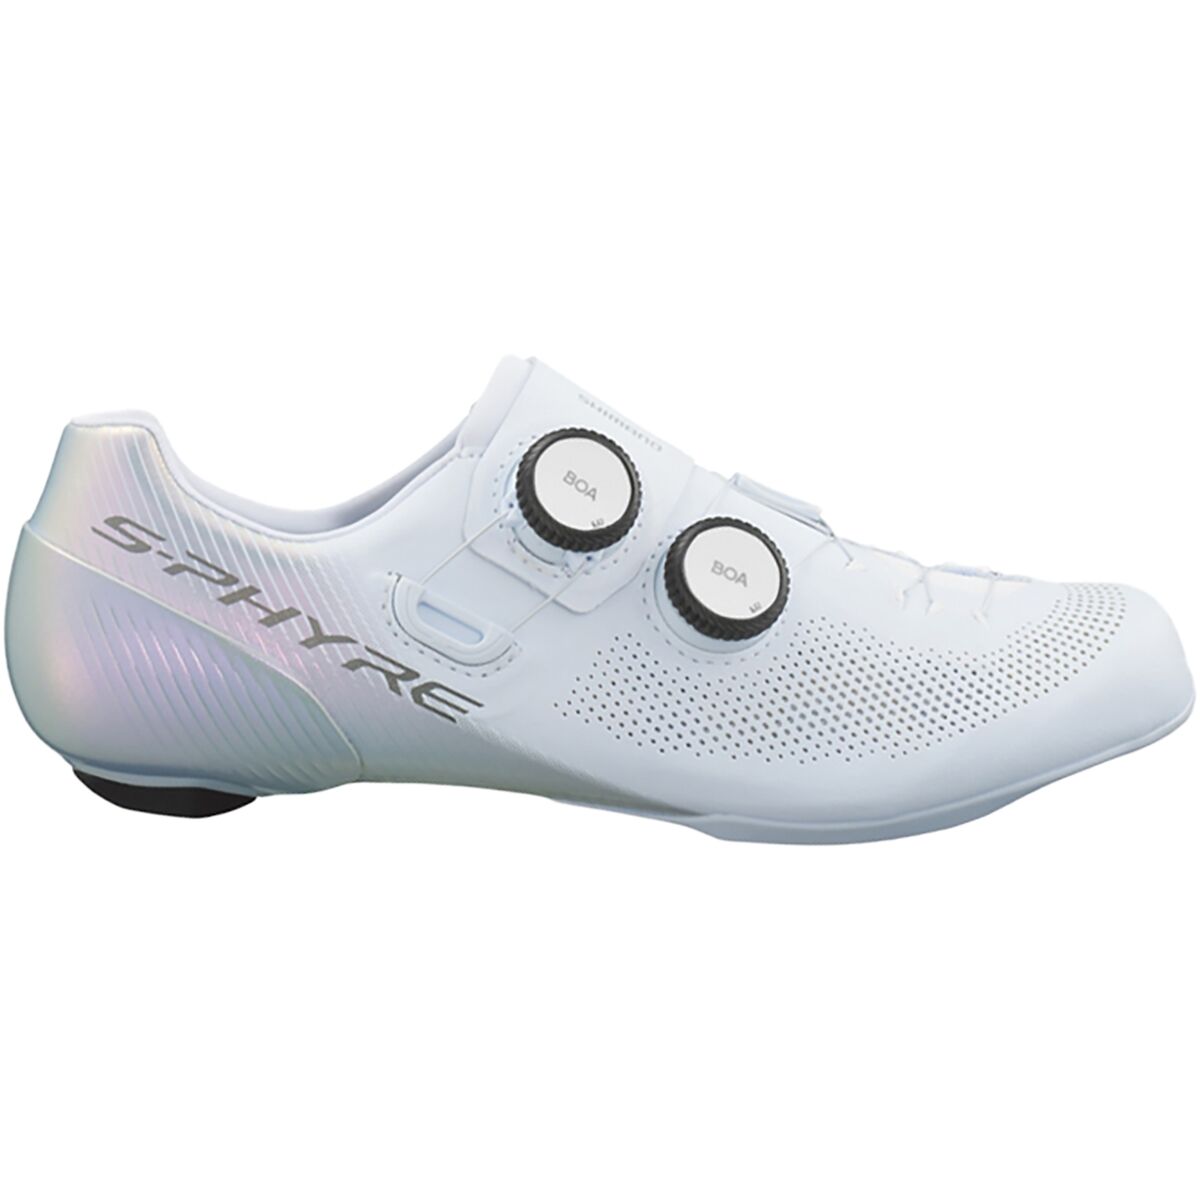 Shimano RC903 SPHYRE Cycling Shoes - Women's